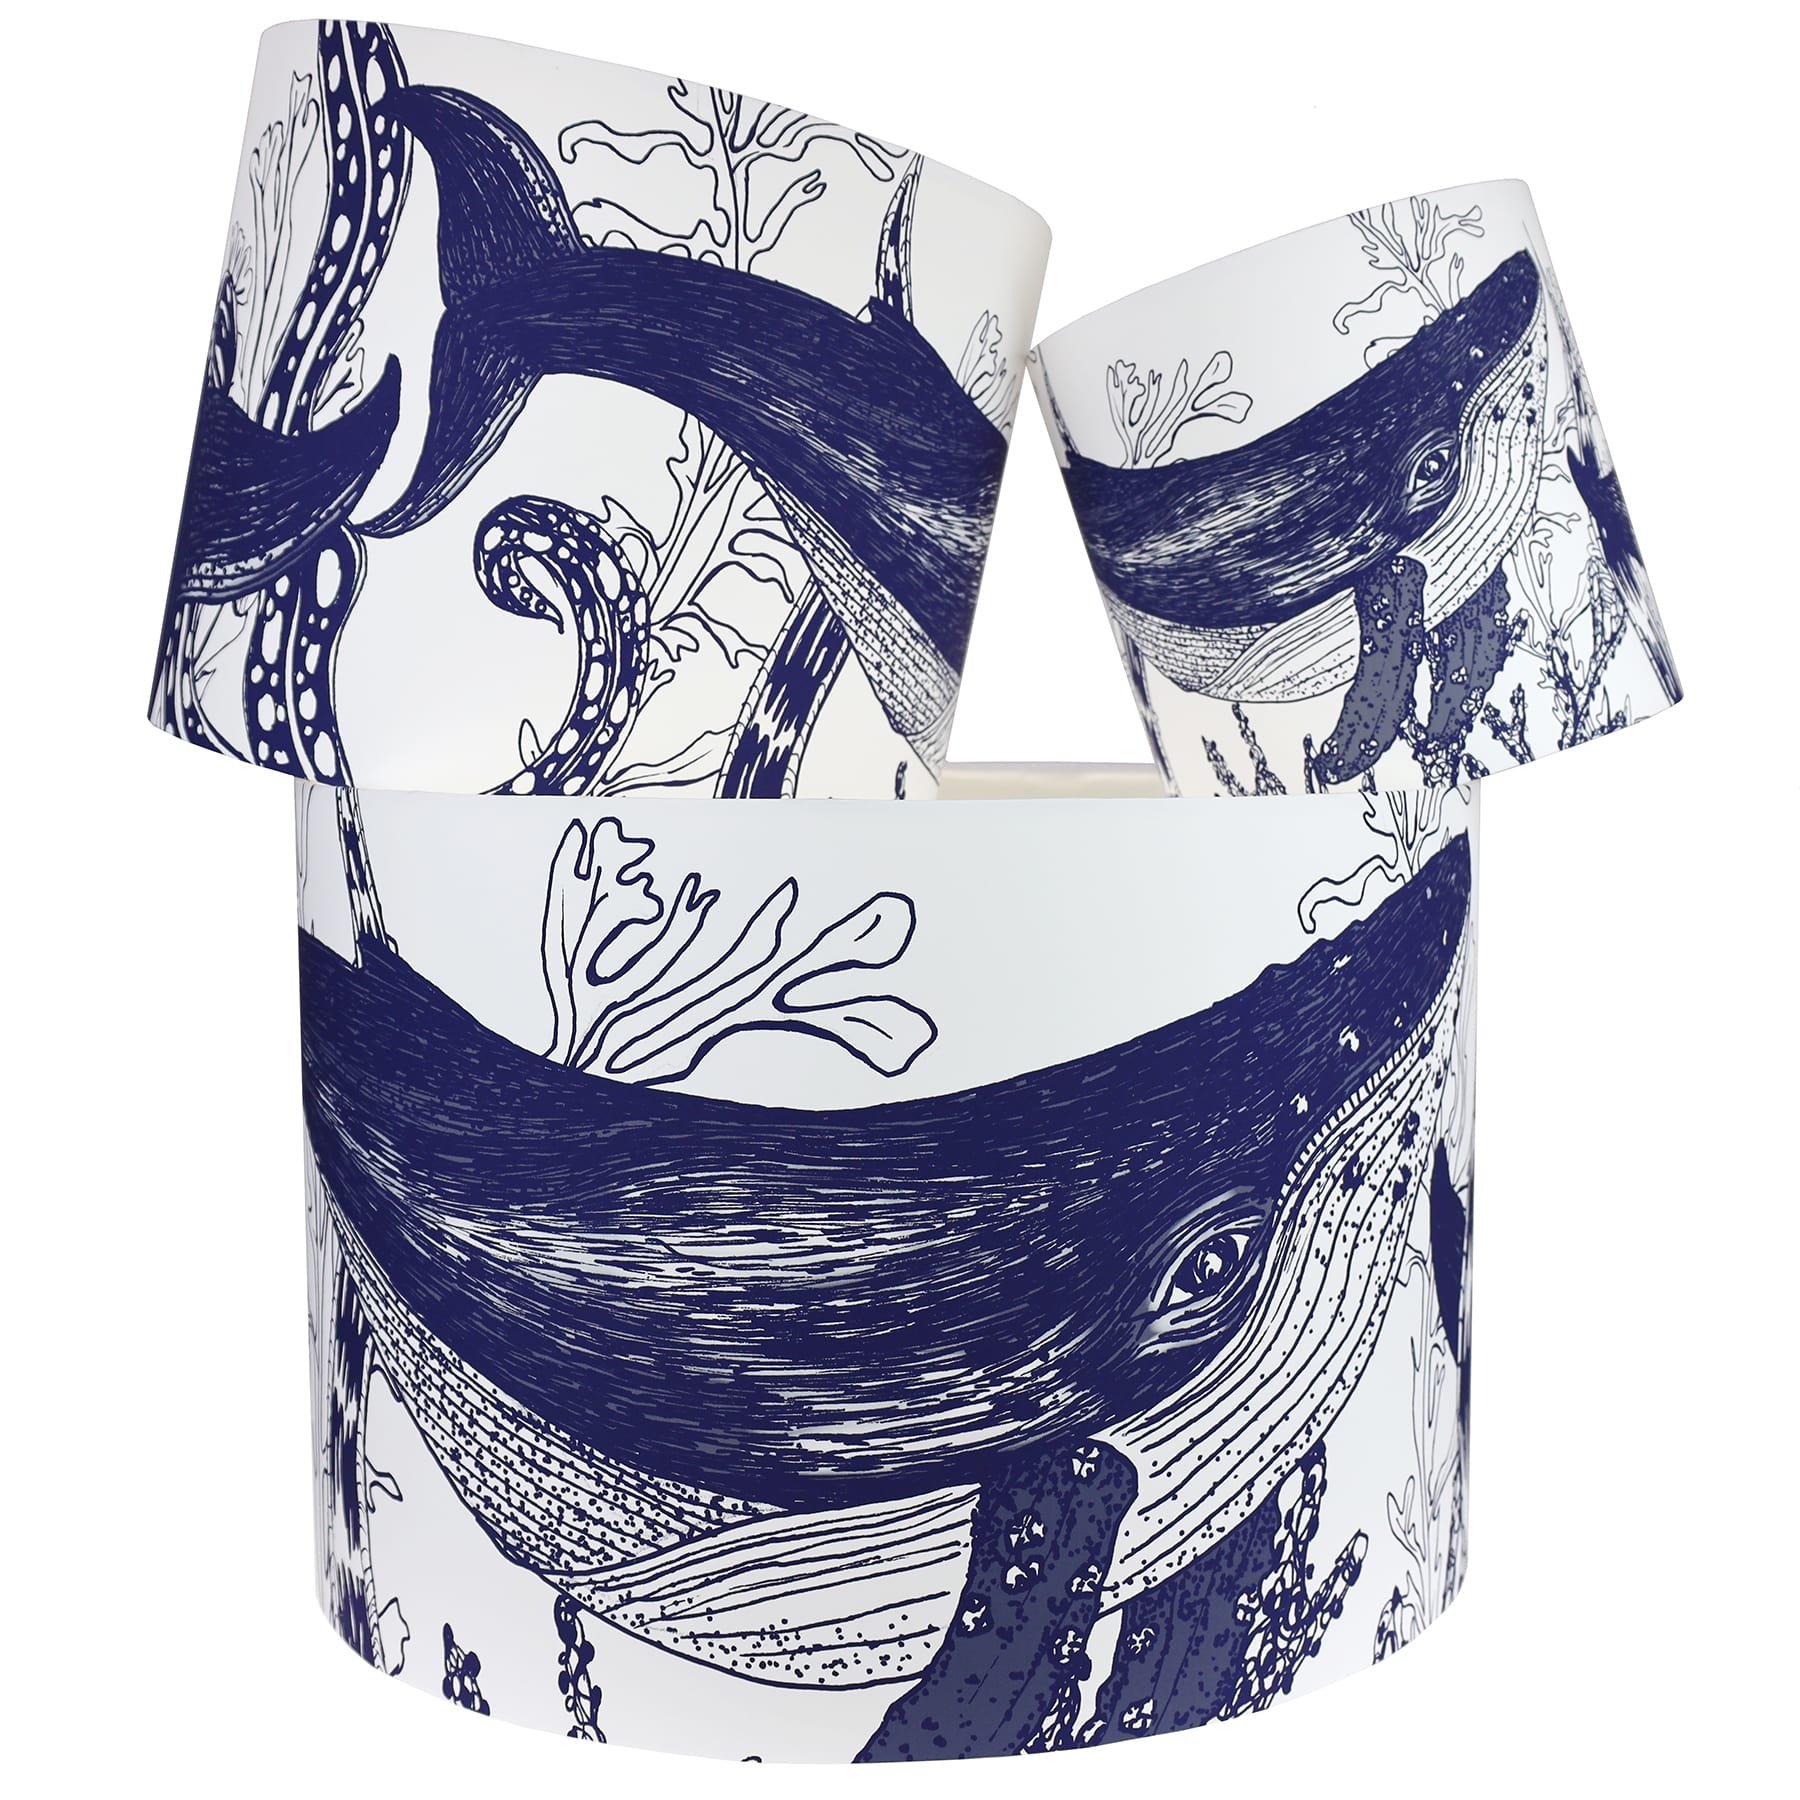 Our Classic Navy Whale design on a white background.The lampshades are shown in a stack of three showing all three sizes.